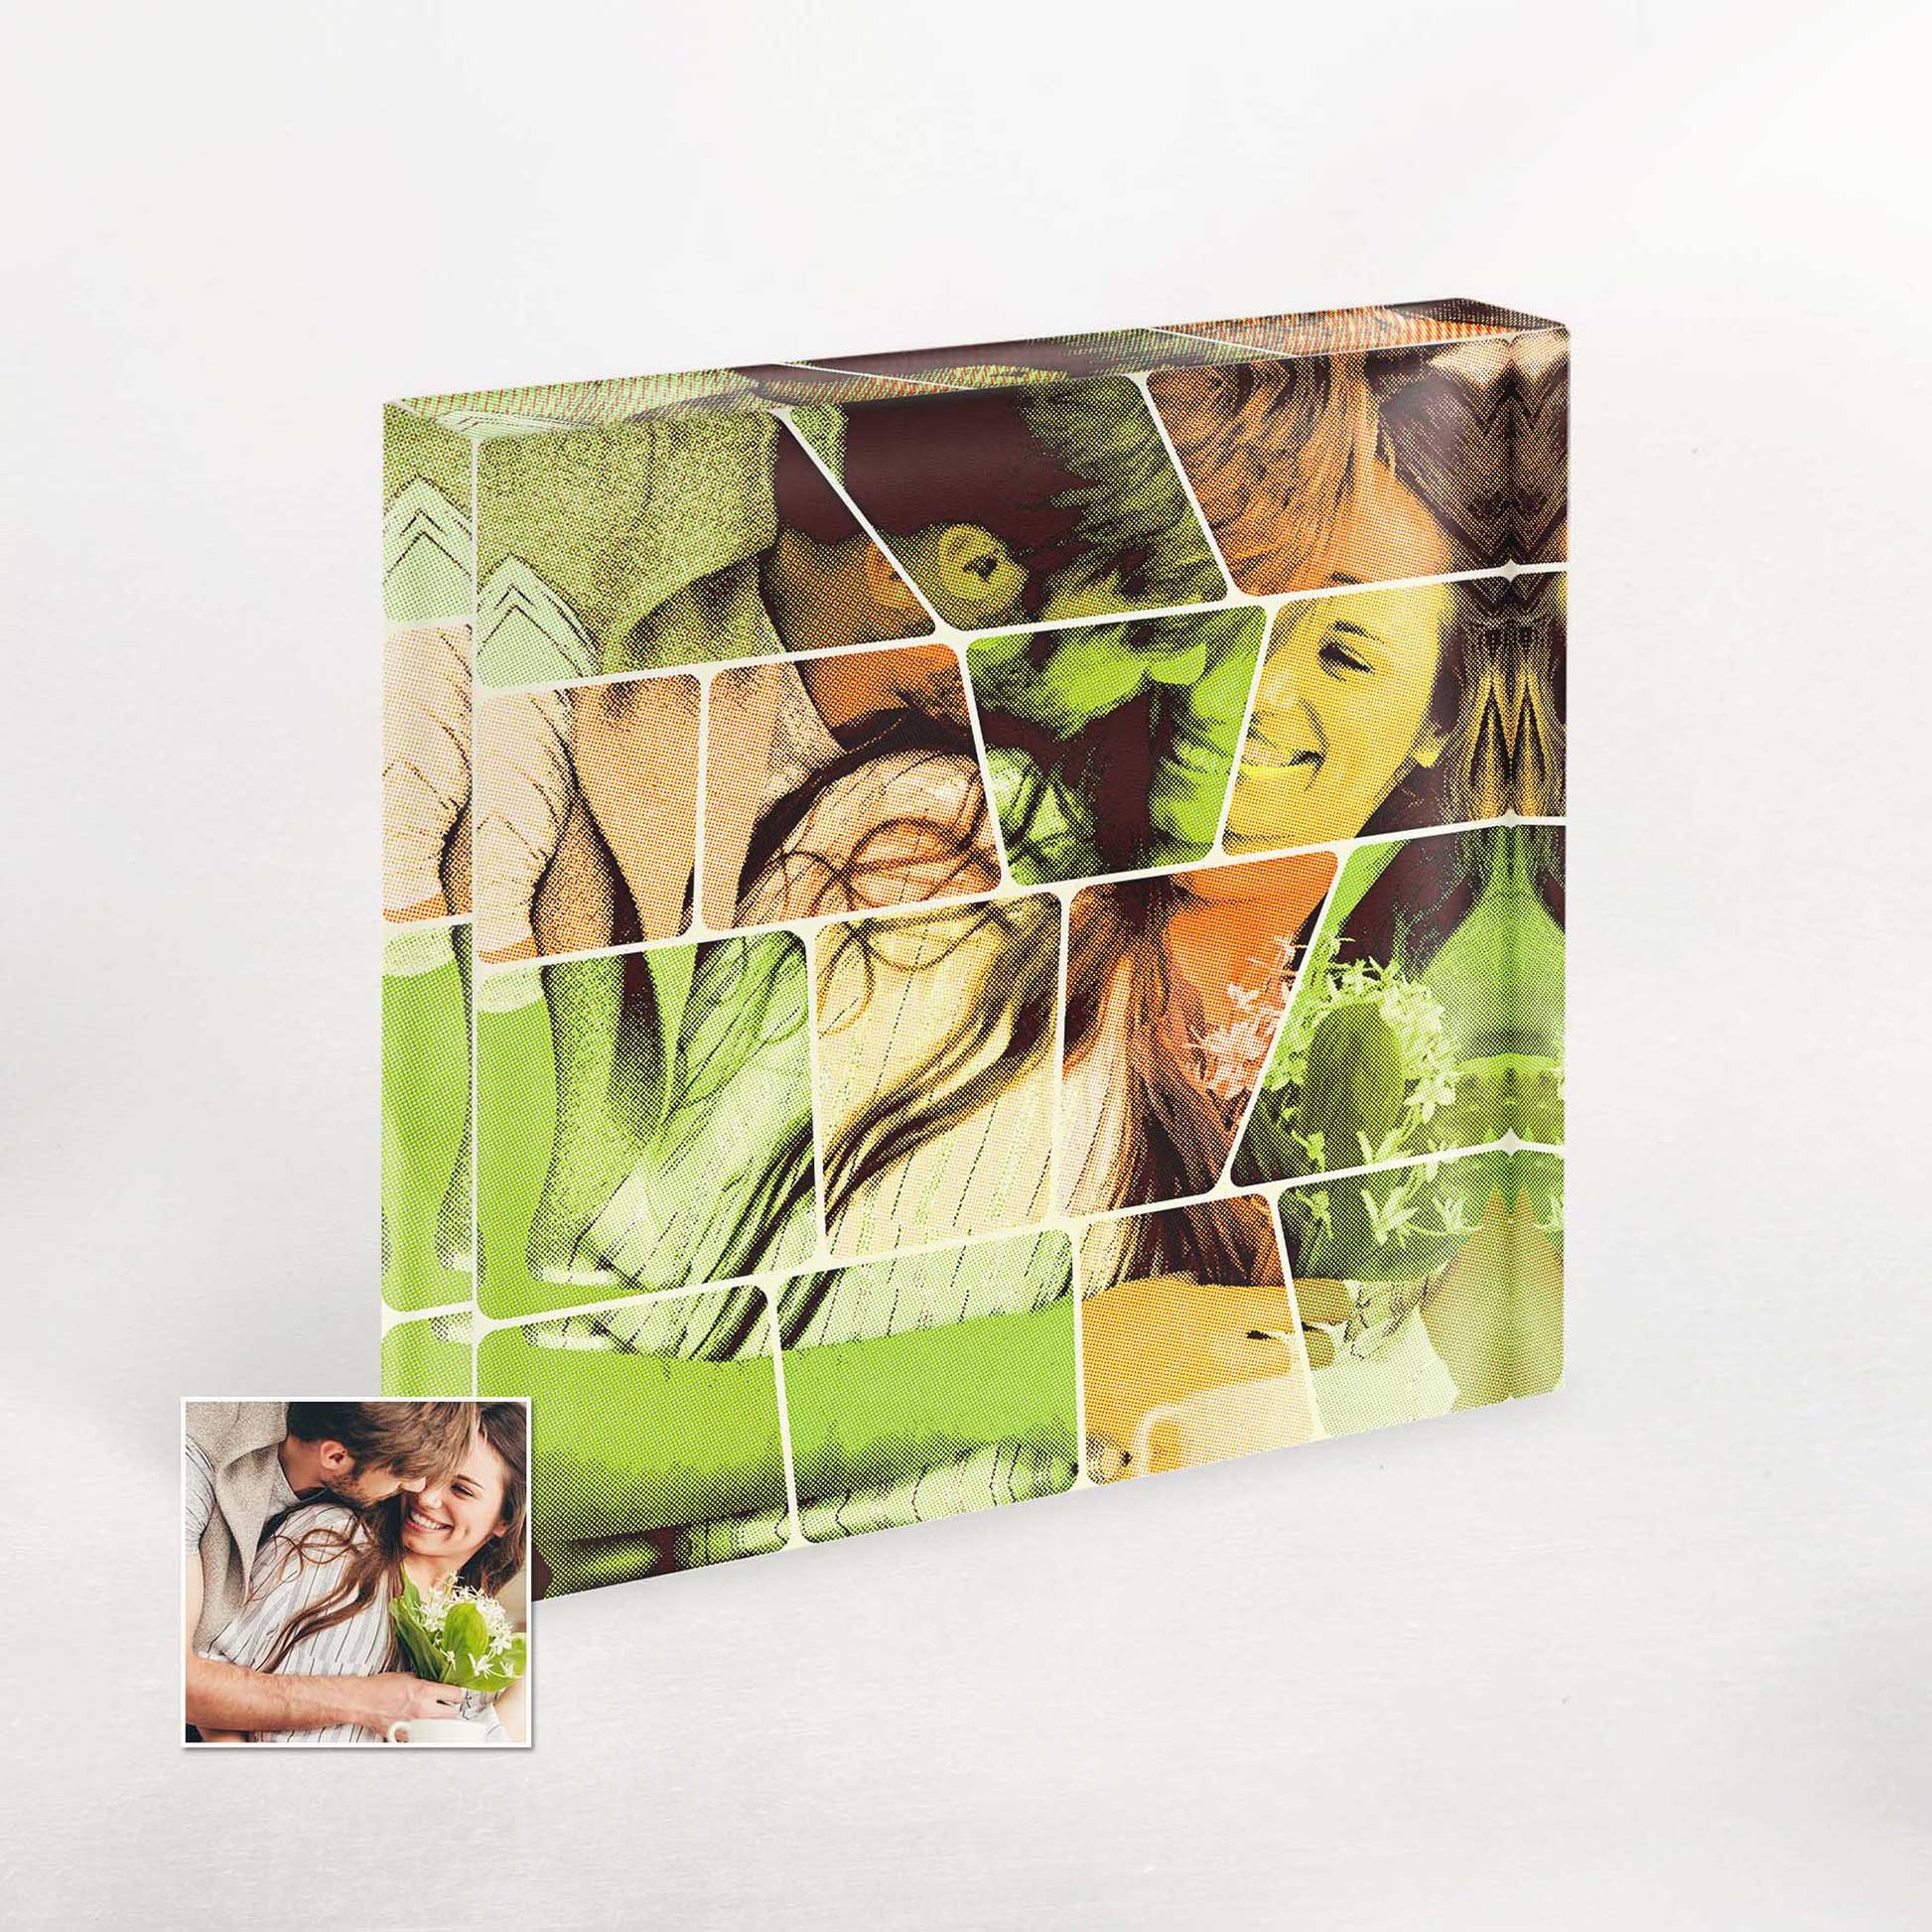 Create a personalized gift that oozes happiness and joy with our Personalised Vintage Comic Acrylic Block Photo. Its fun and vibrant style is perfect for family and friends. Add a trendy and energetic touch to any room with this unique piece.